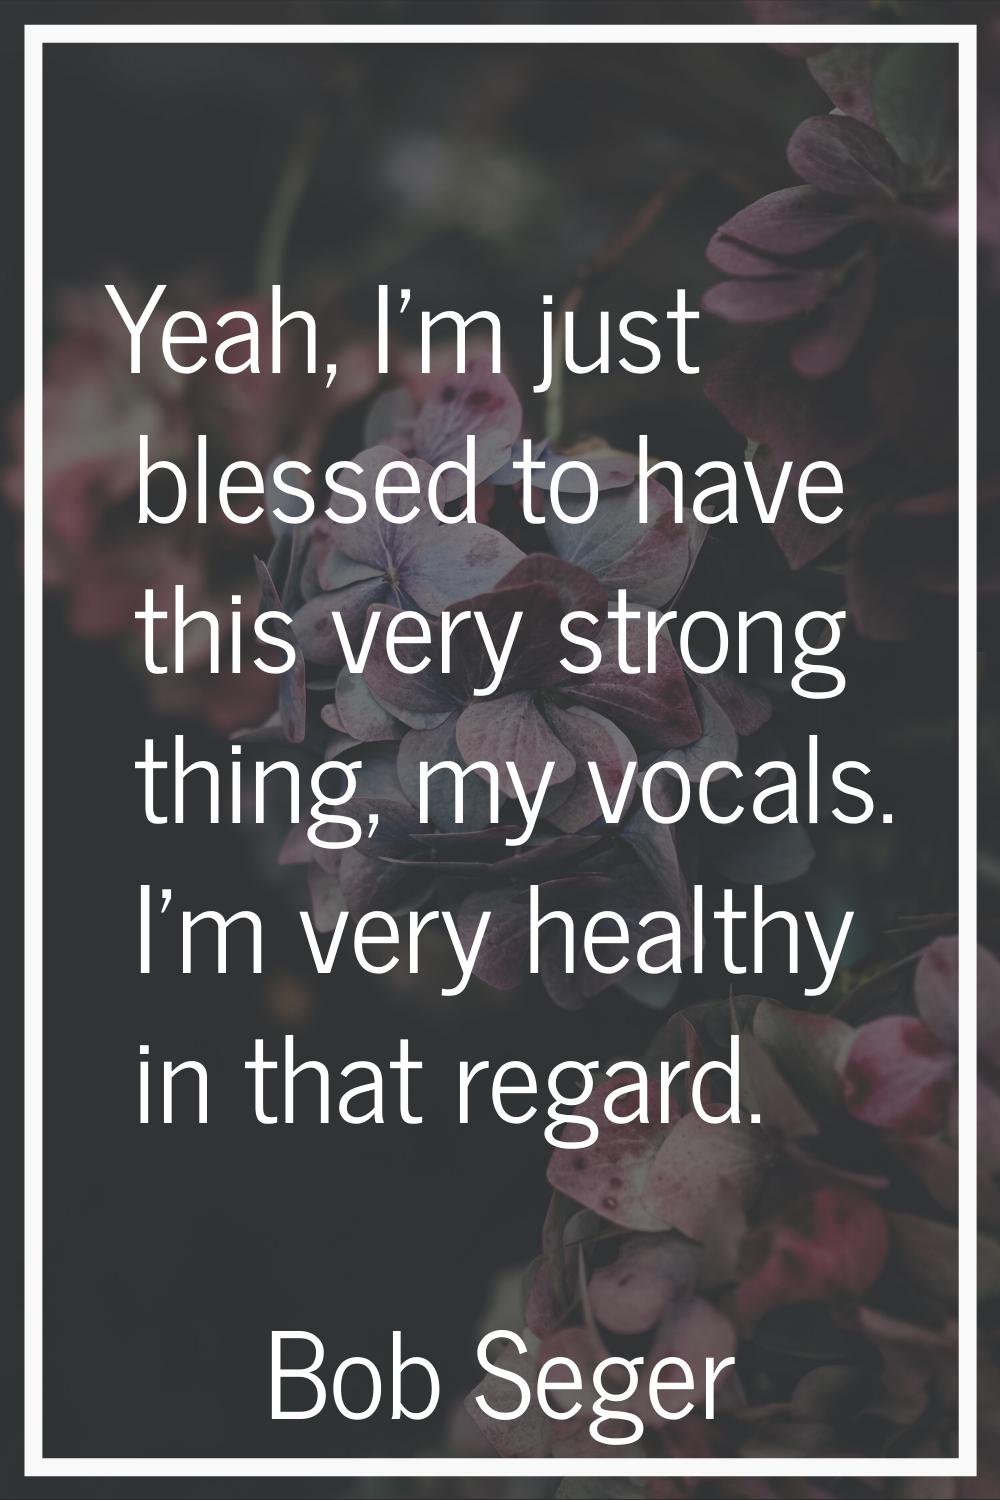 Yeah, I'm just blessed to have this very strong thing, my vocals. I'm very healthy in that regard.